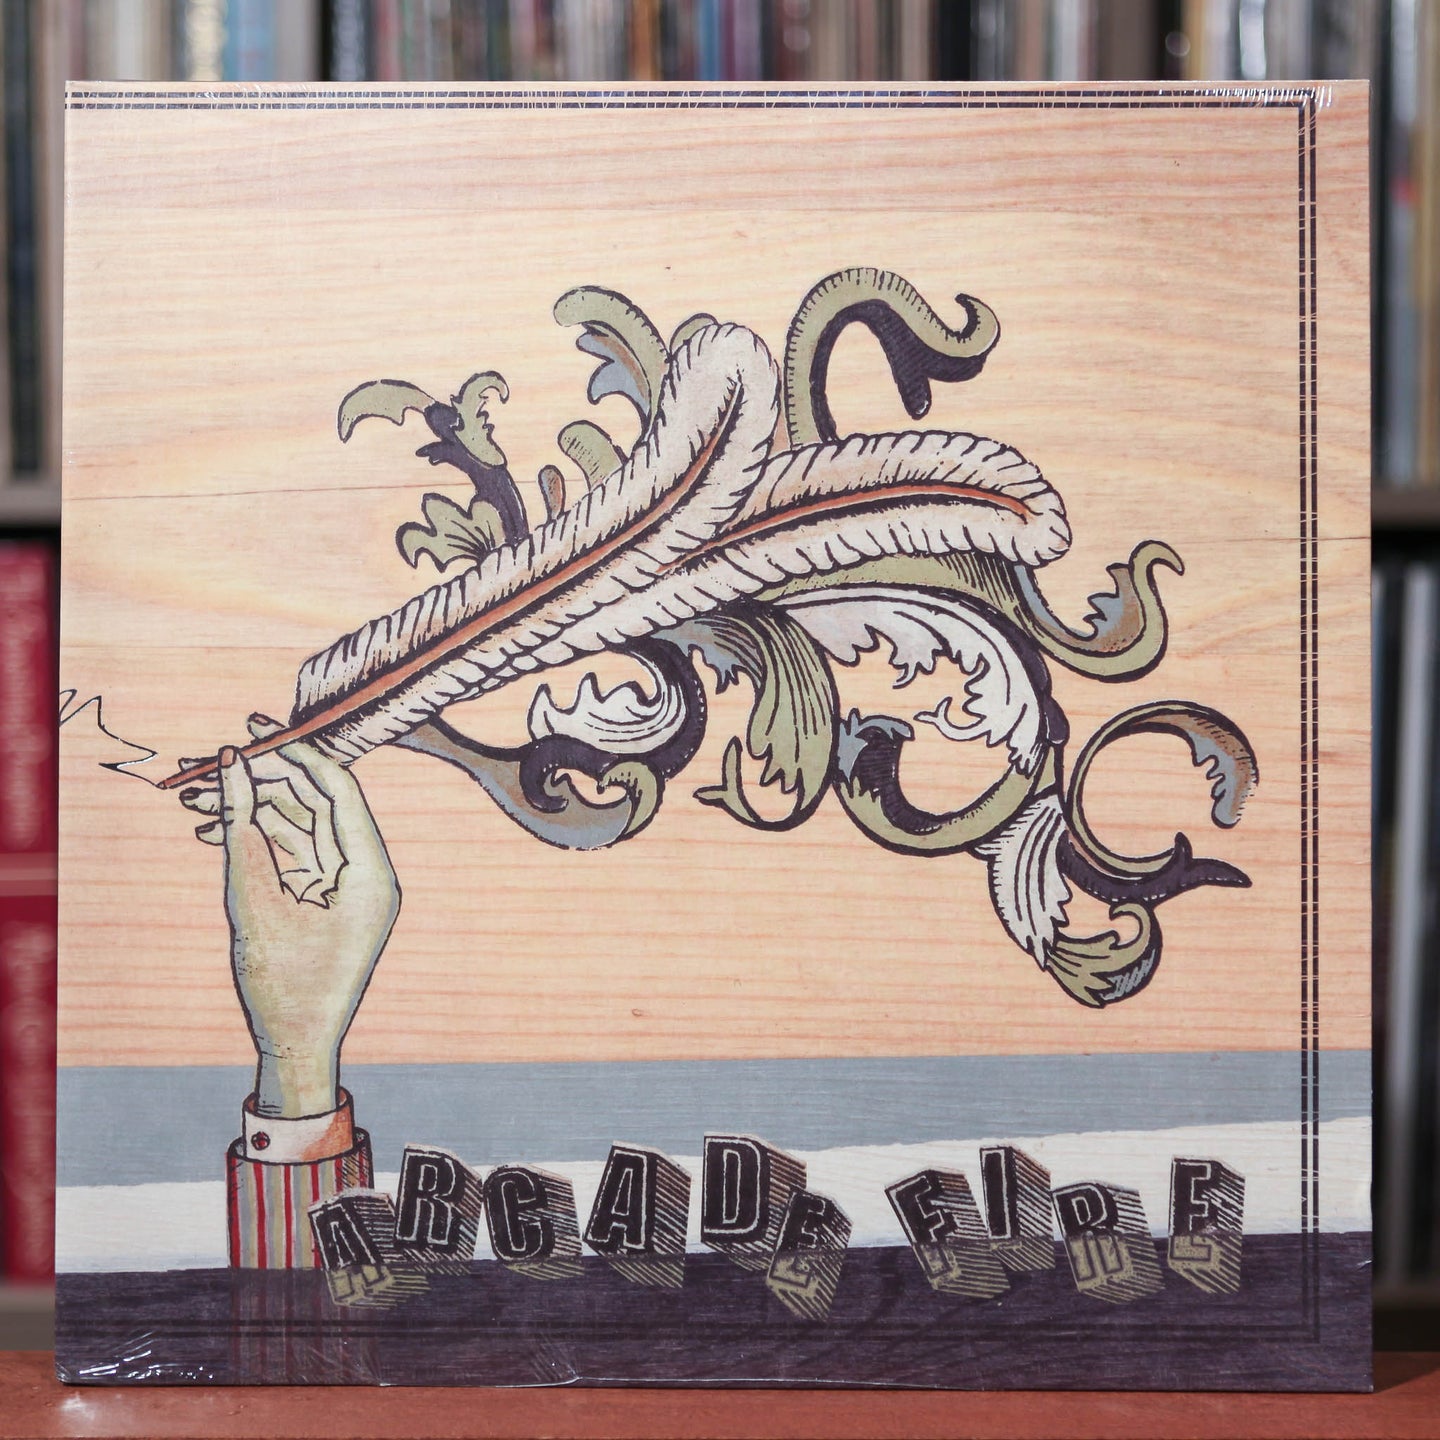 Arcade Fire - Funeral - 2017 Sony Music, SEALED